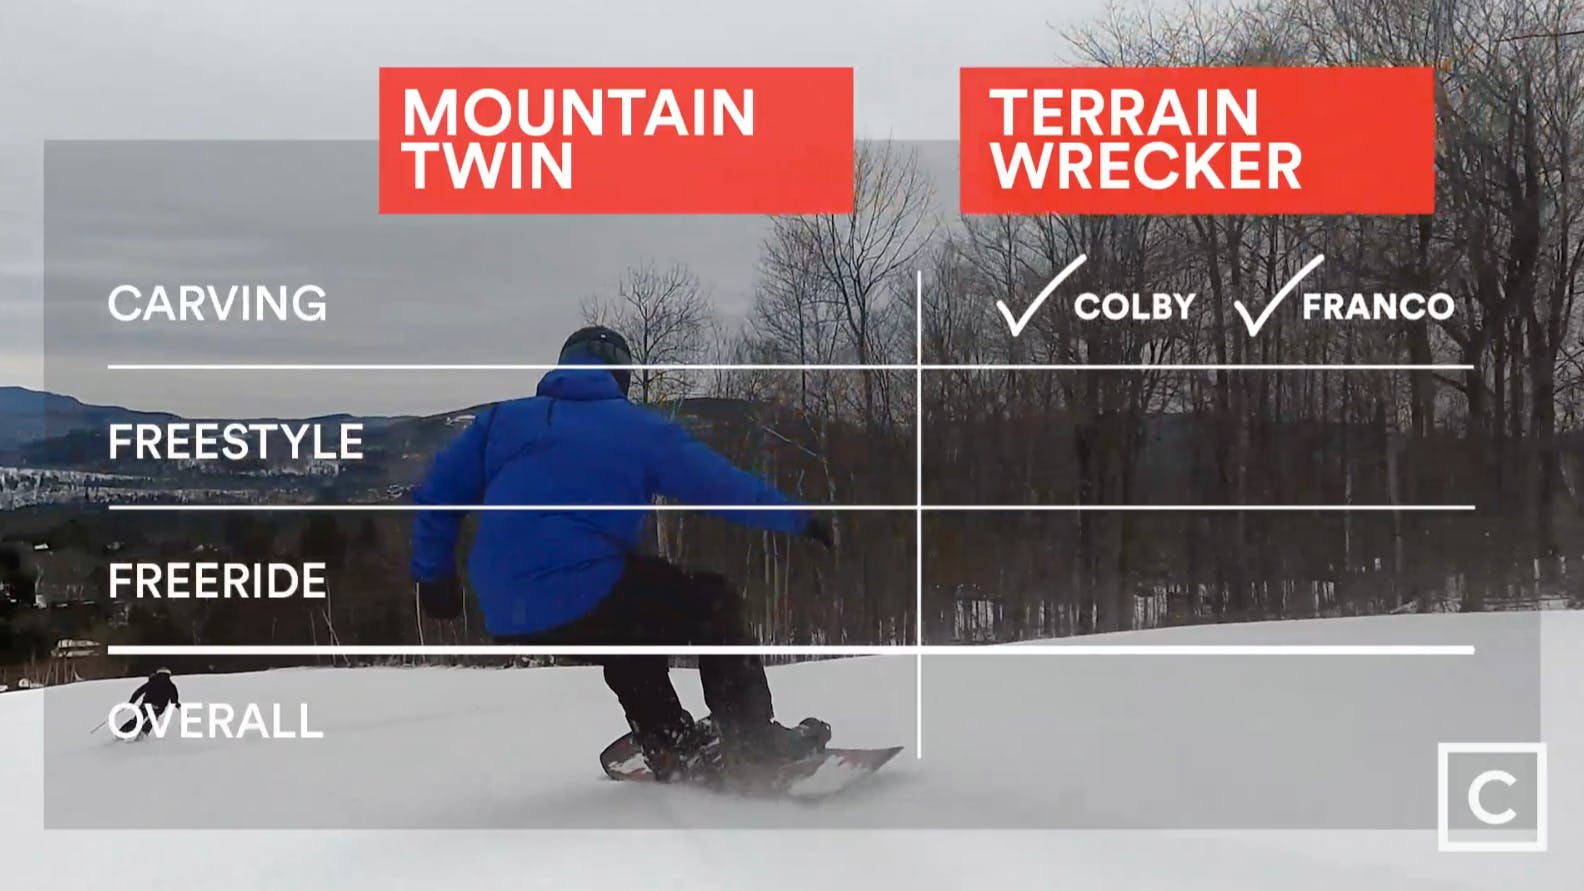 Leaderboard graphic - both Colby and Franco prefer the Lib Tech Terrain Wrecker for carving